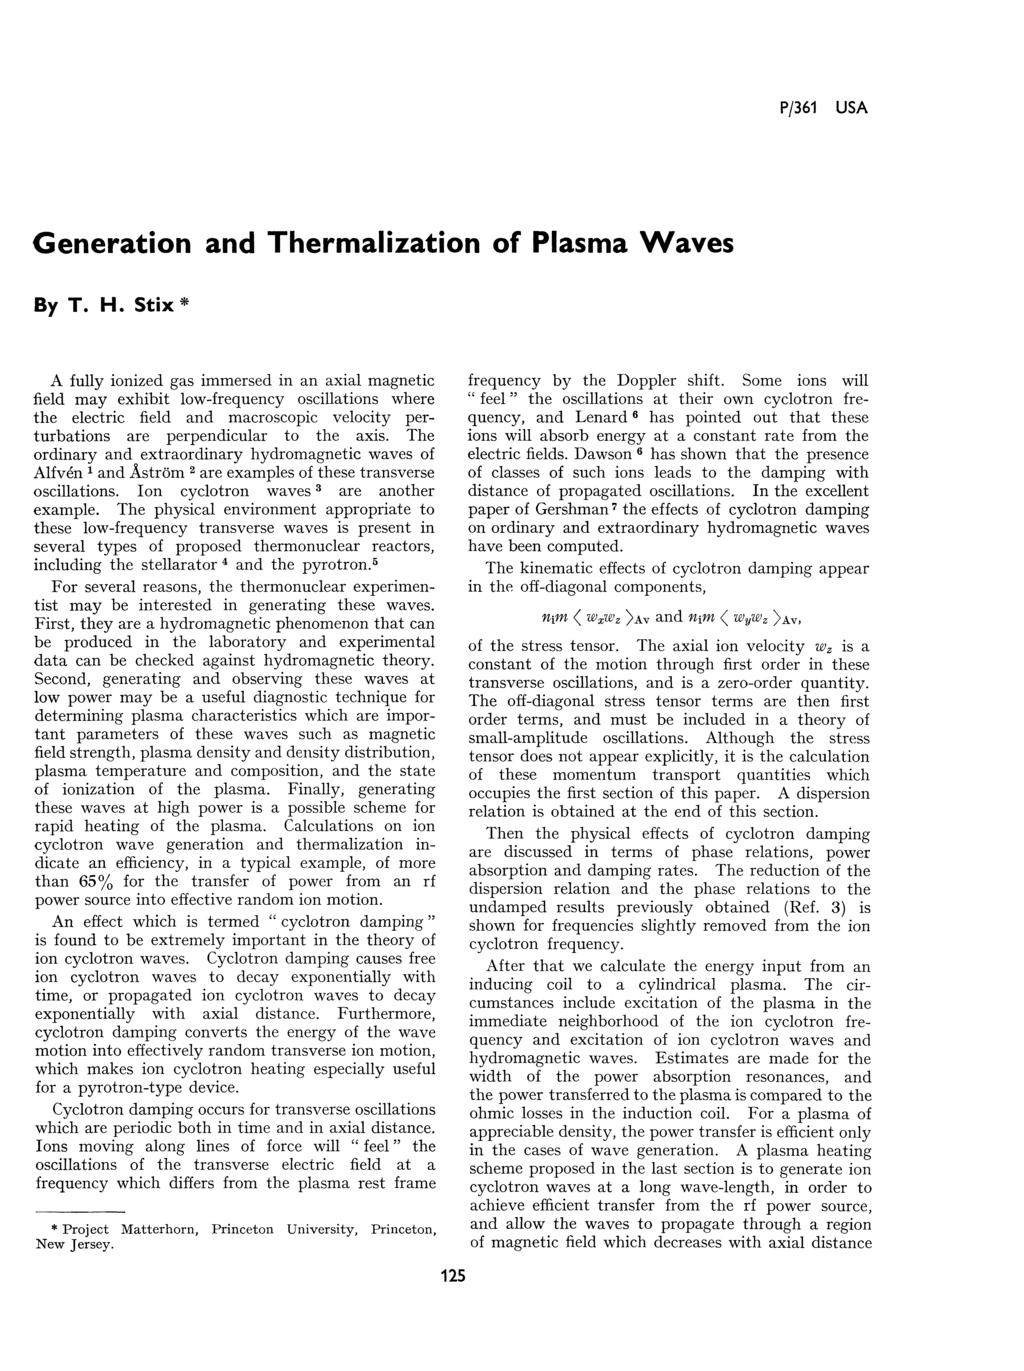 P/361 USA Generation and Thermalization of Plasma Waves By T. H.